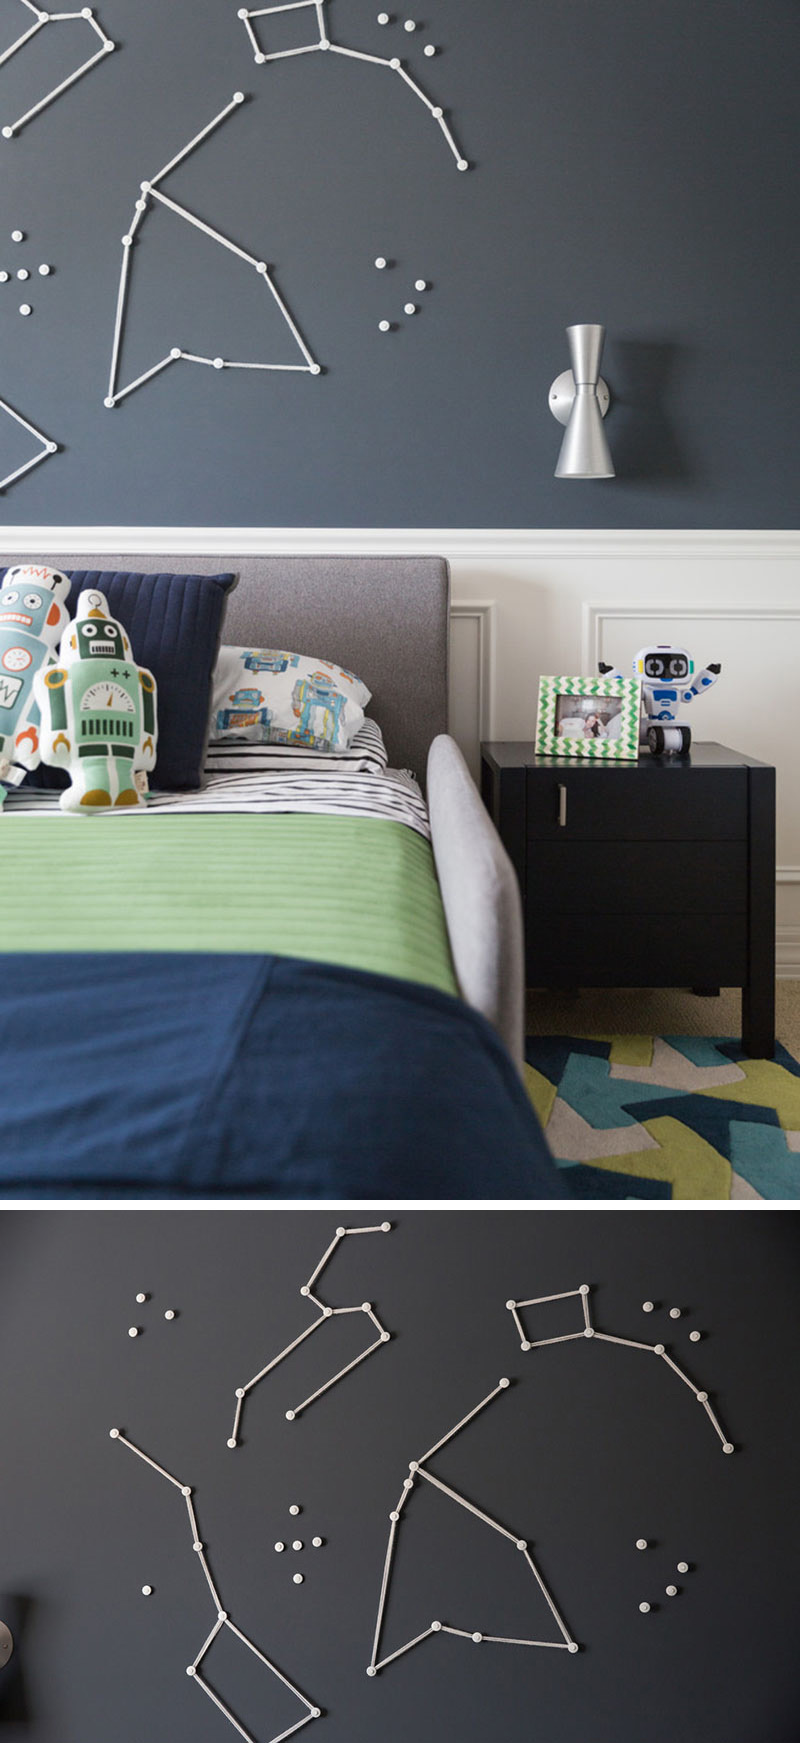 This space themed boy's bedroom has decorative constellation wall art on the blue-grey wall above the bed.